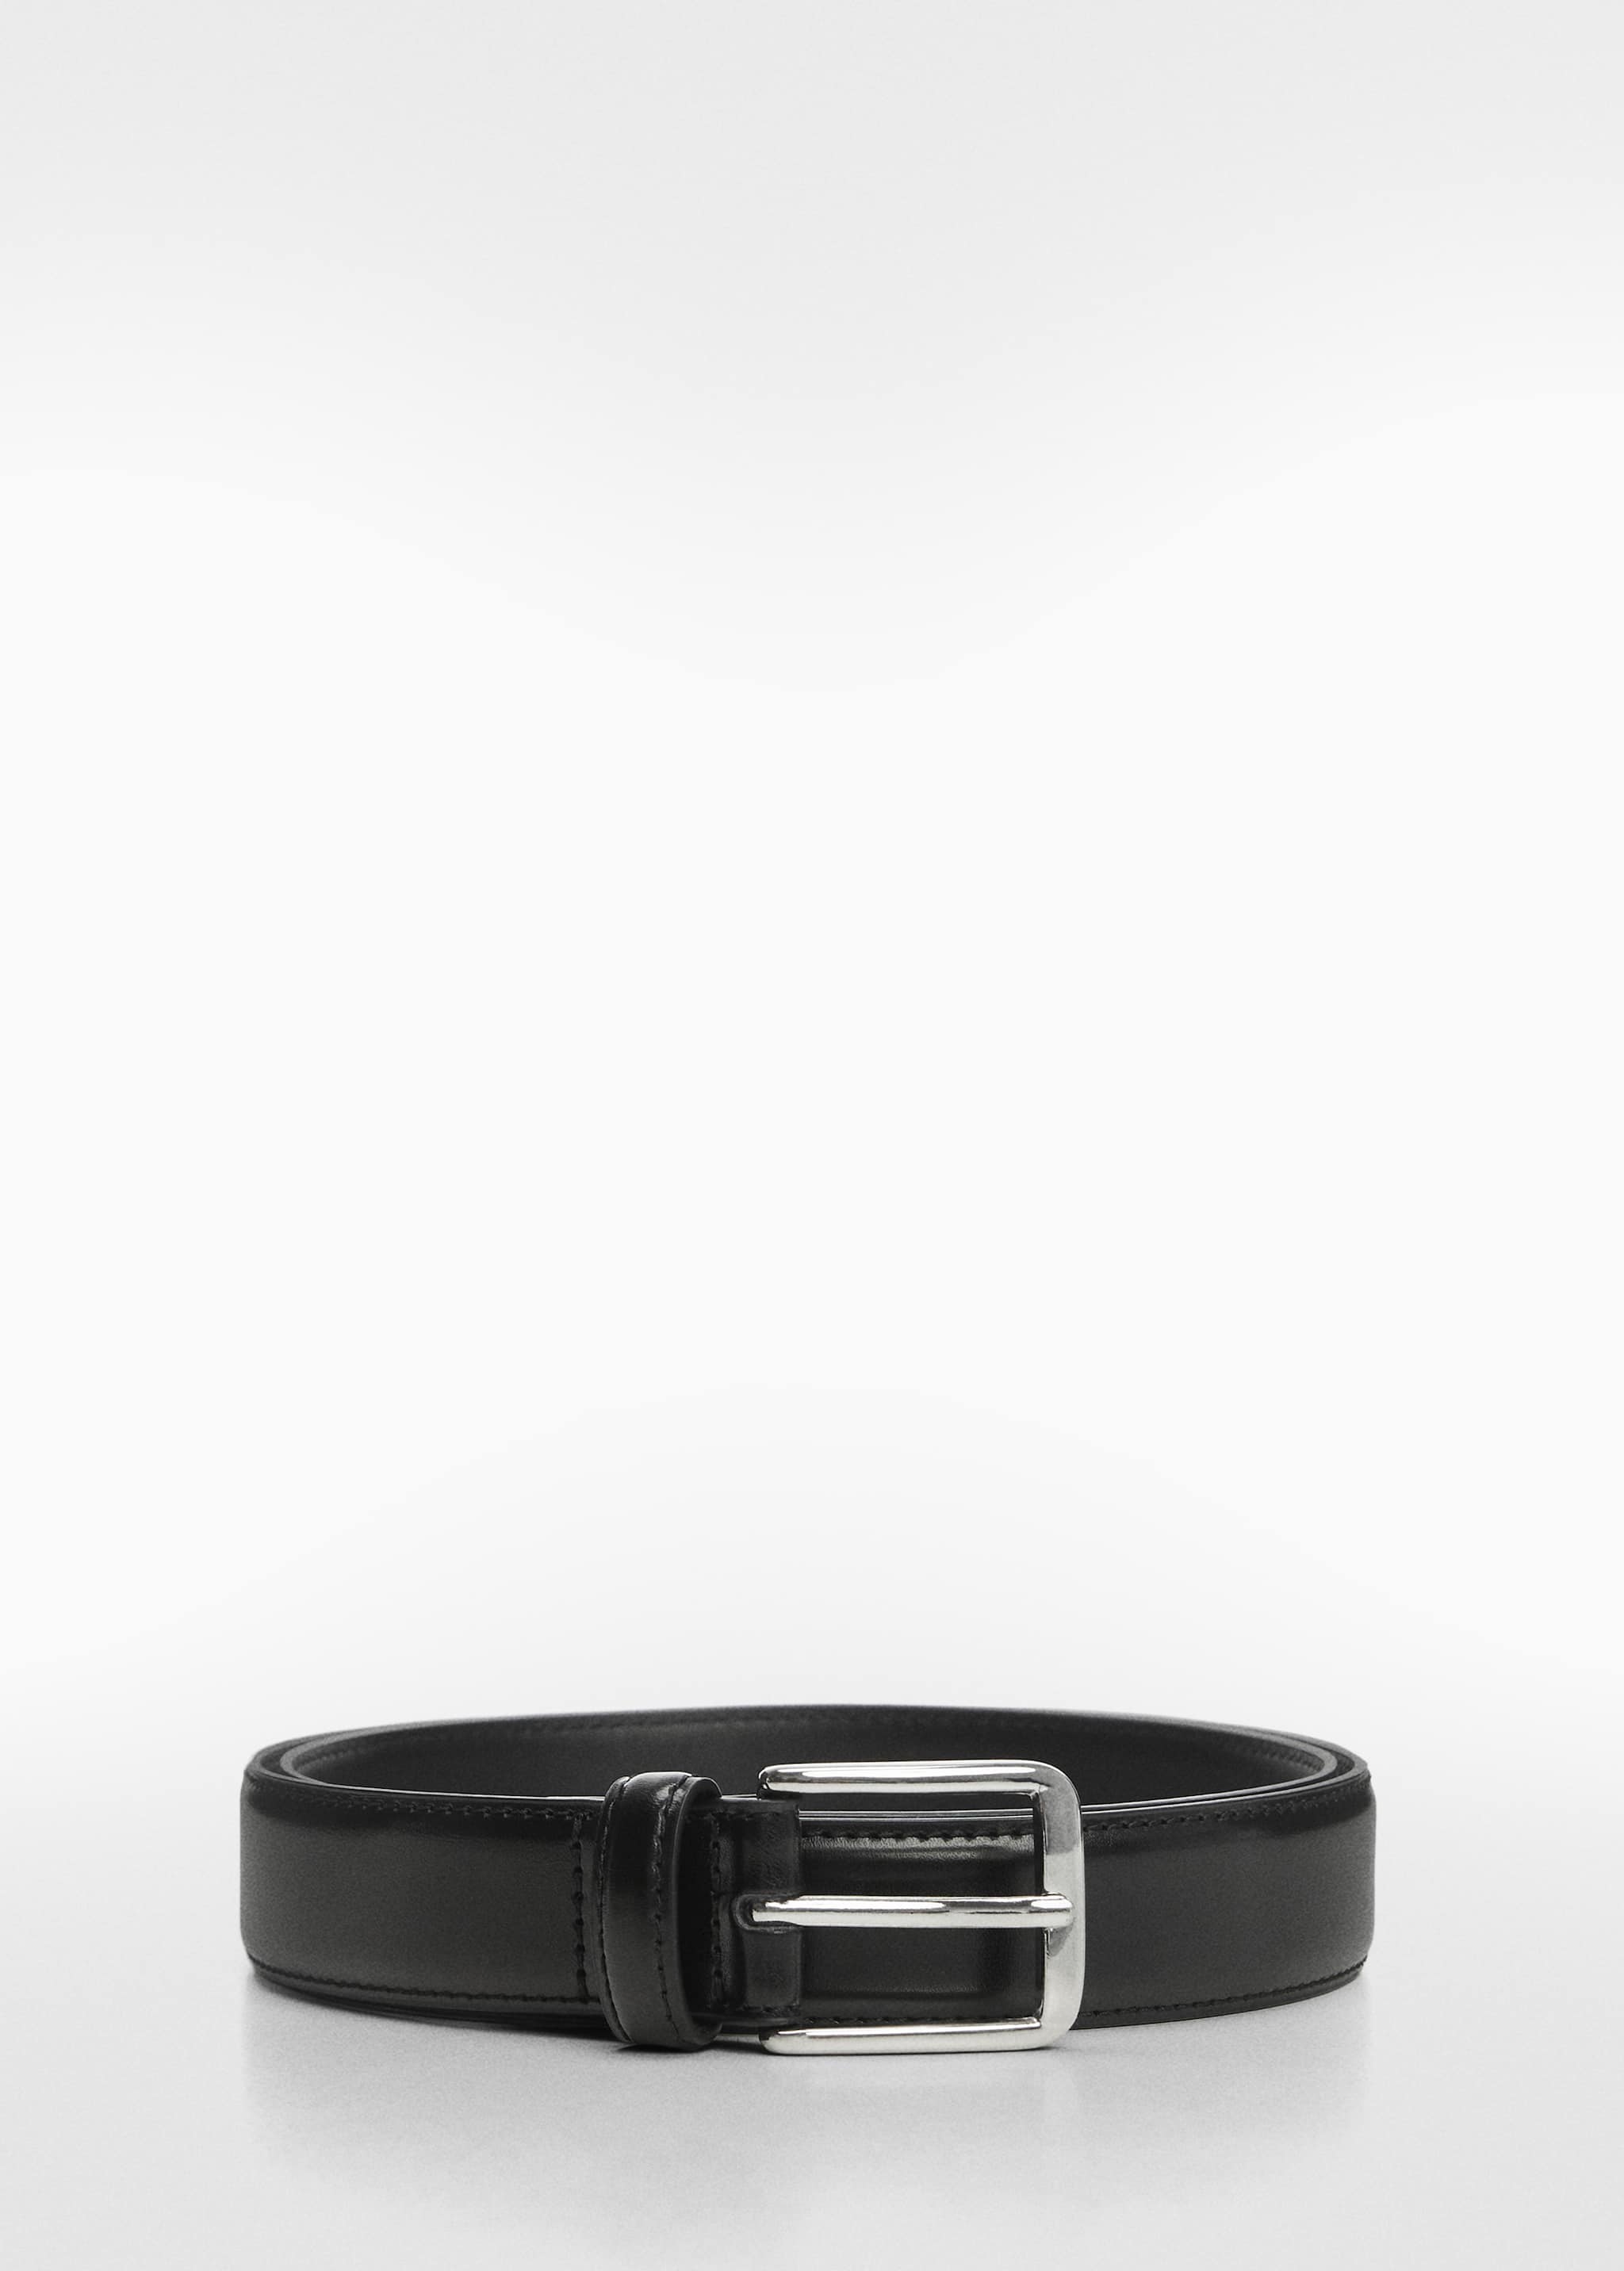 Leather belt - Article without model